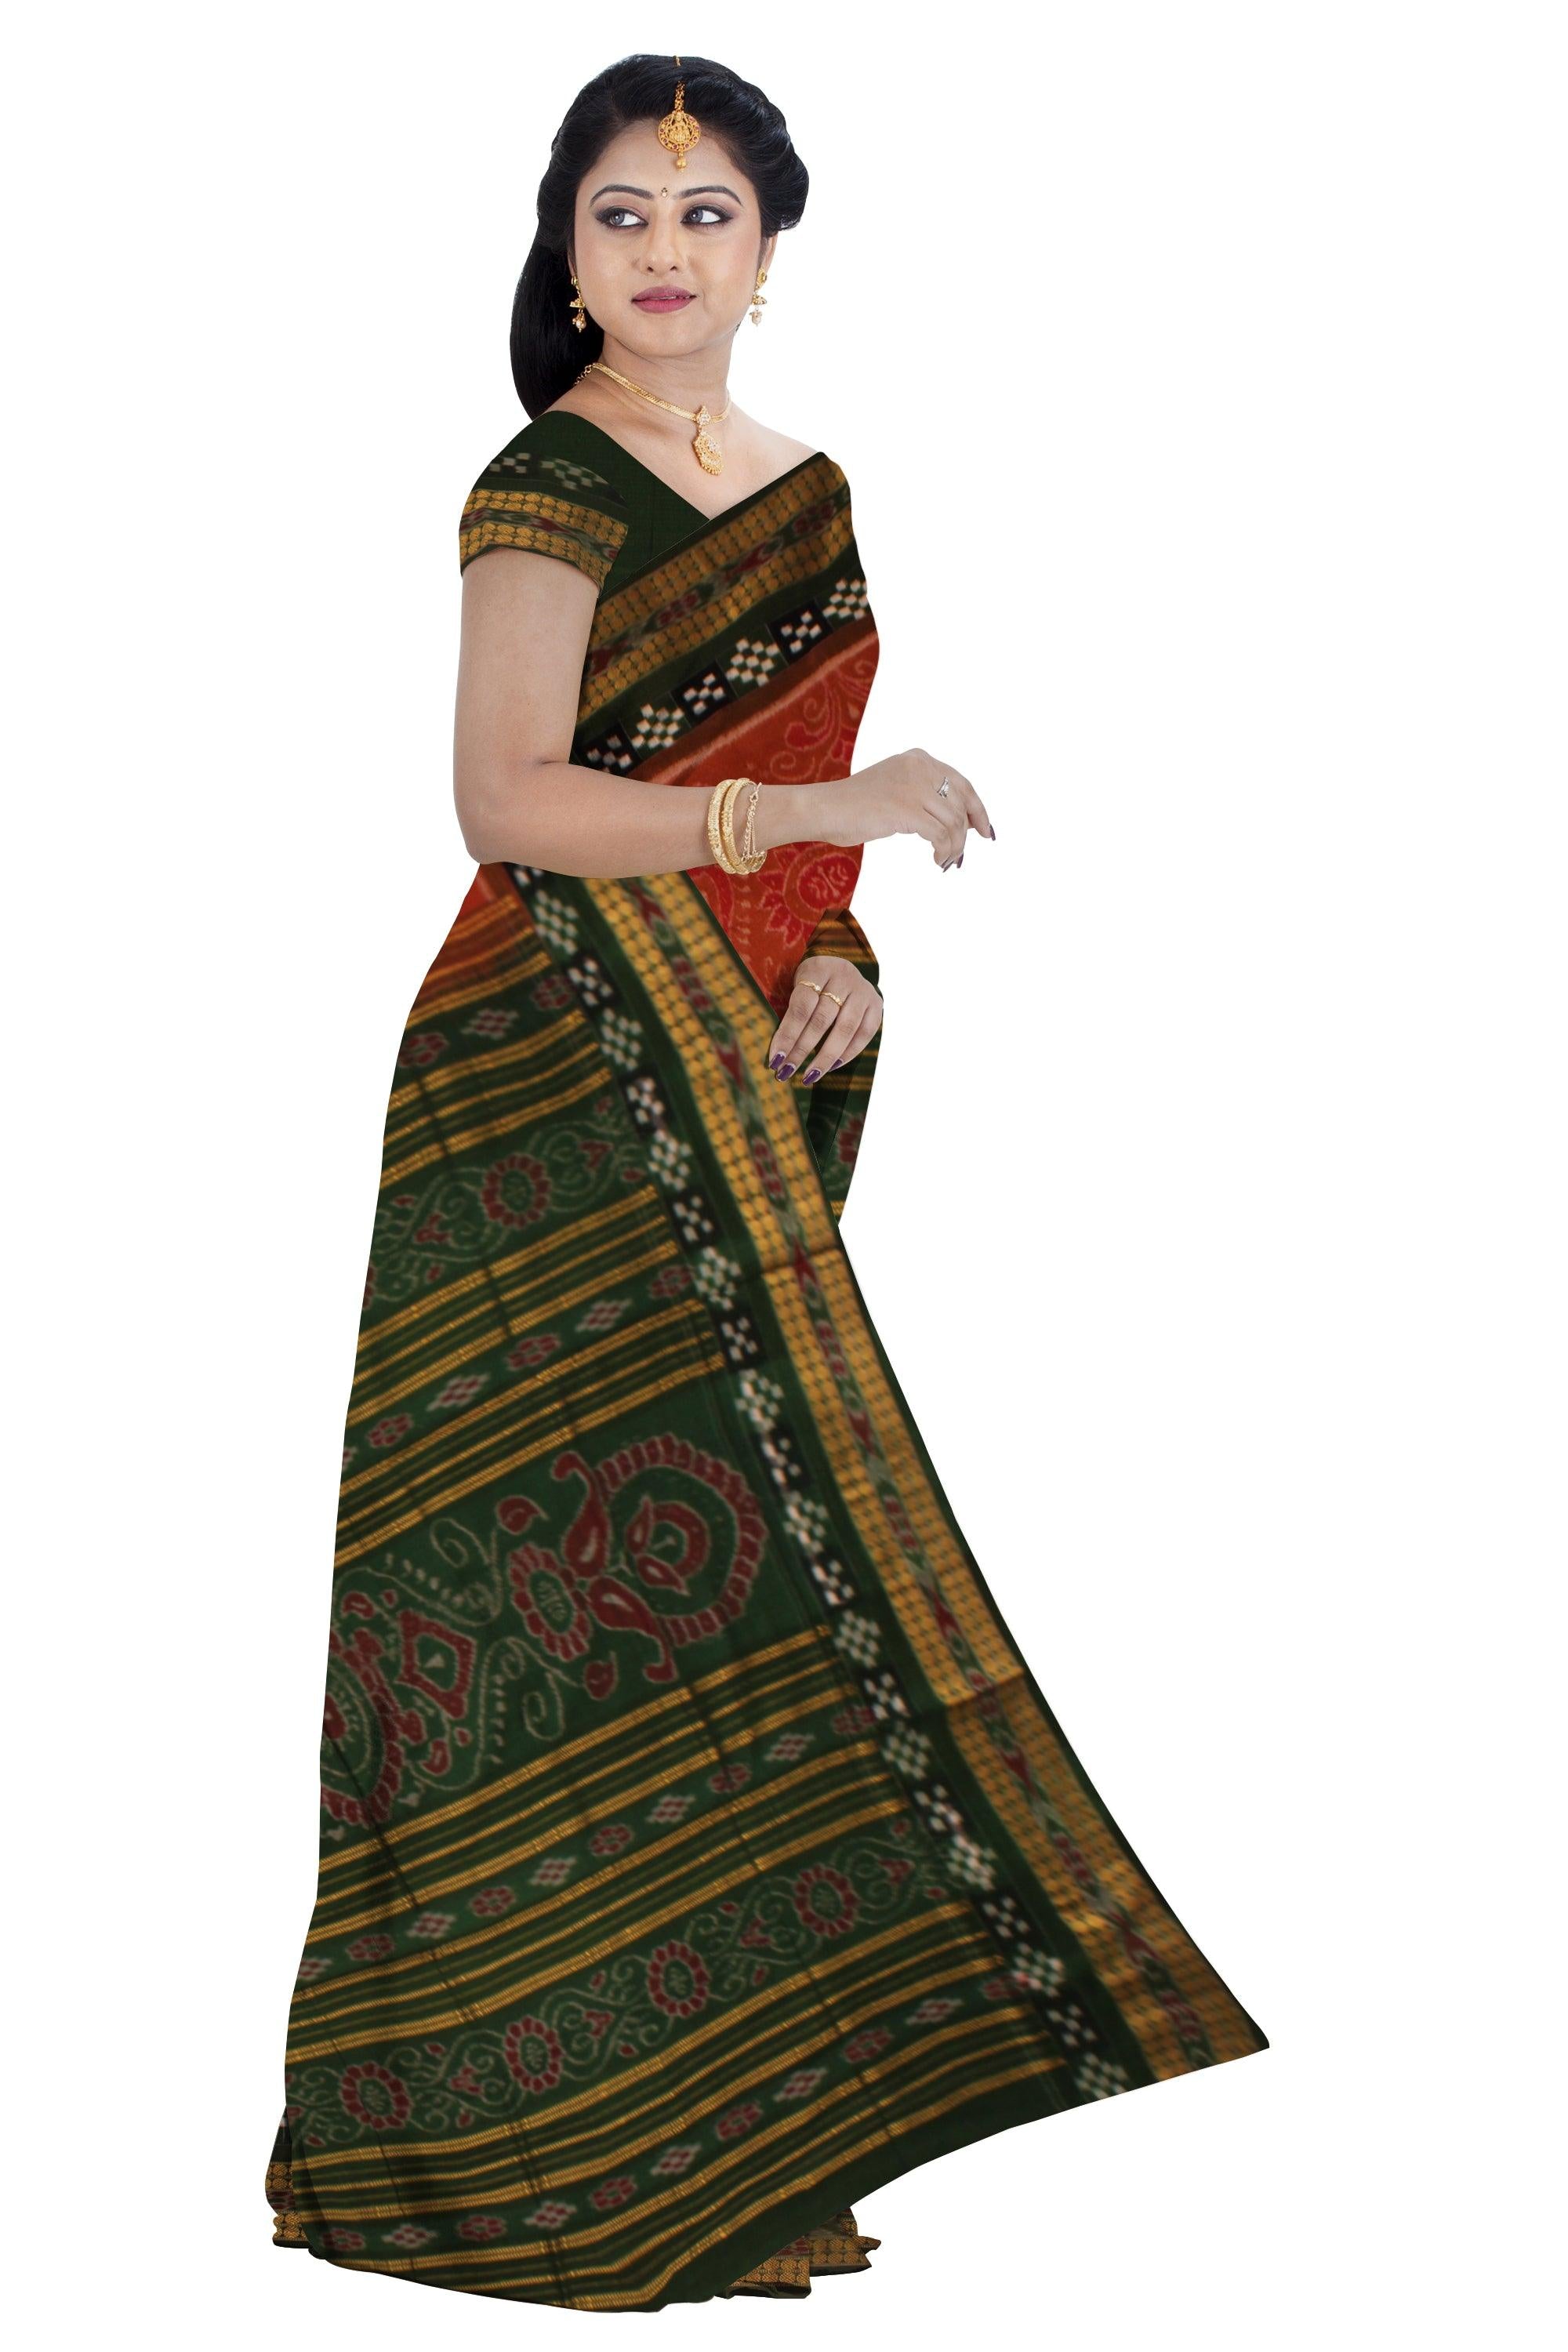 BODY MAYURI PRINT PURE COTTON SAREE IN 3D COLOR BASE, ATTACHED WITH BLOUSE PIECE. - Koshali Arts & Crafts Enterprise